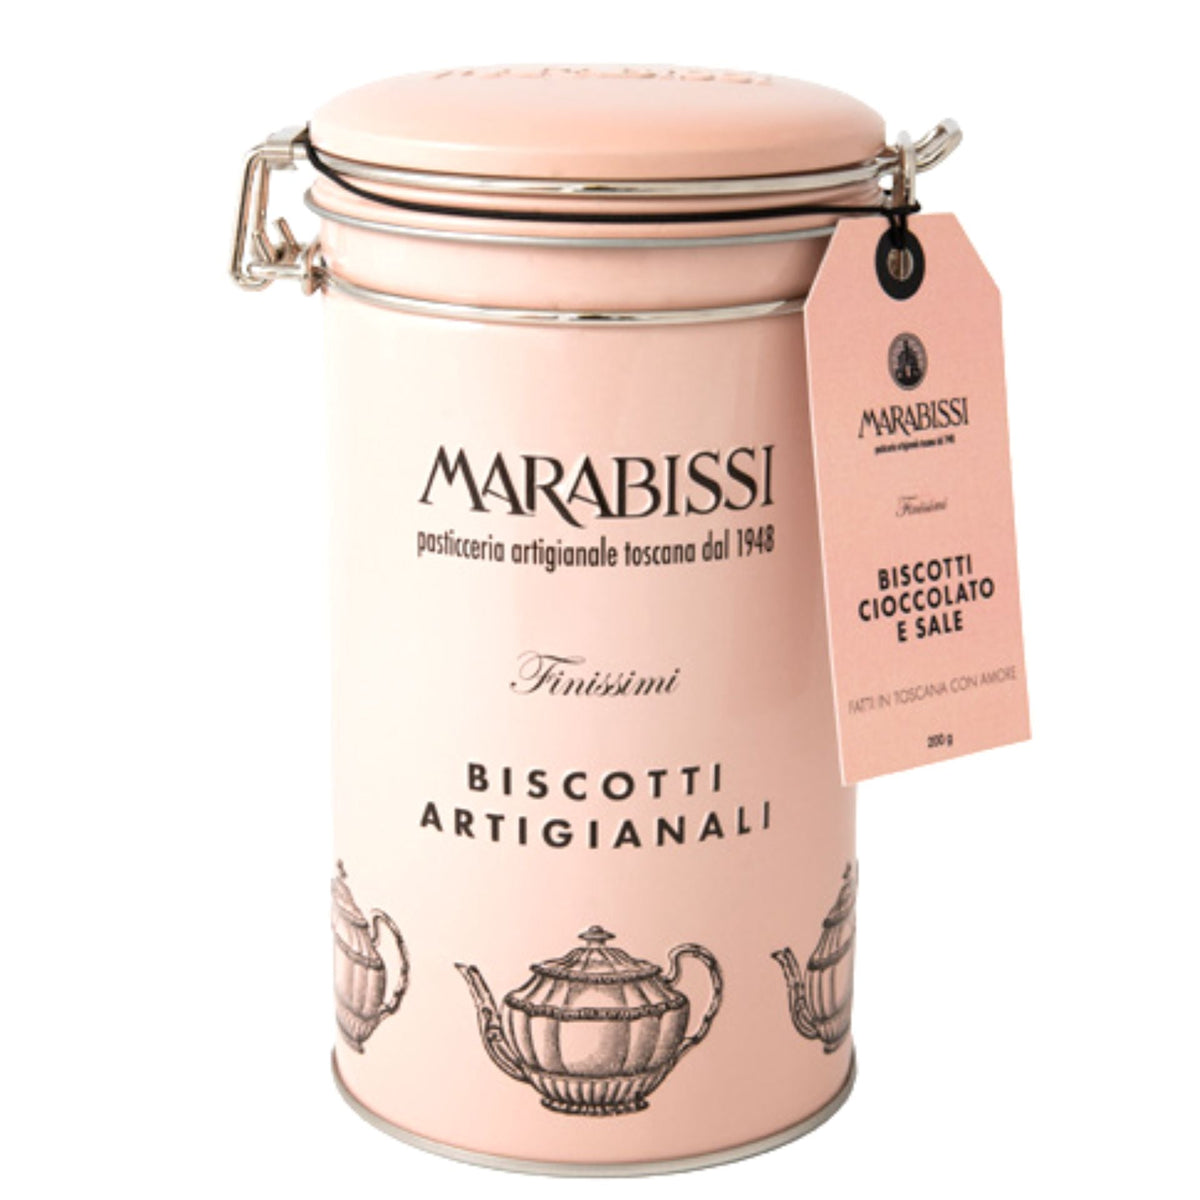 Marabissi Chocolate &amp; Sea Salt Artisan Biscuits (Tin) 200g  | Imported and distributed in the UK by Just Gourmet Foods